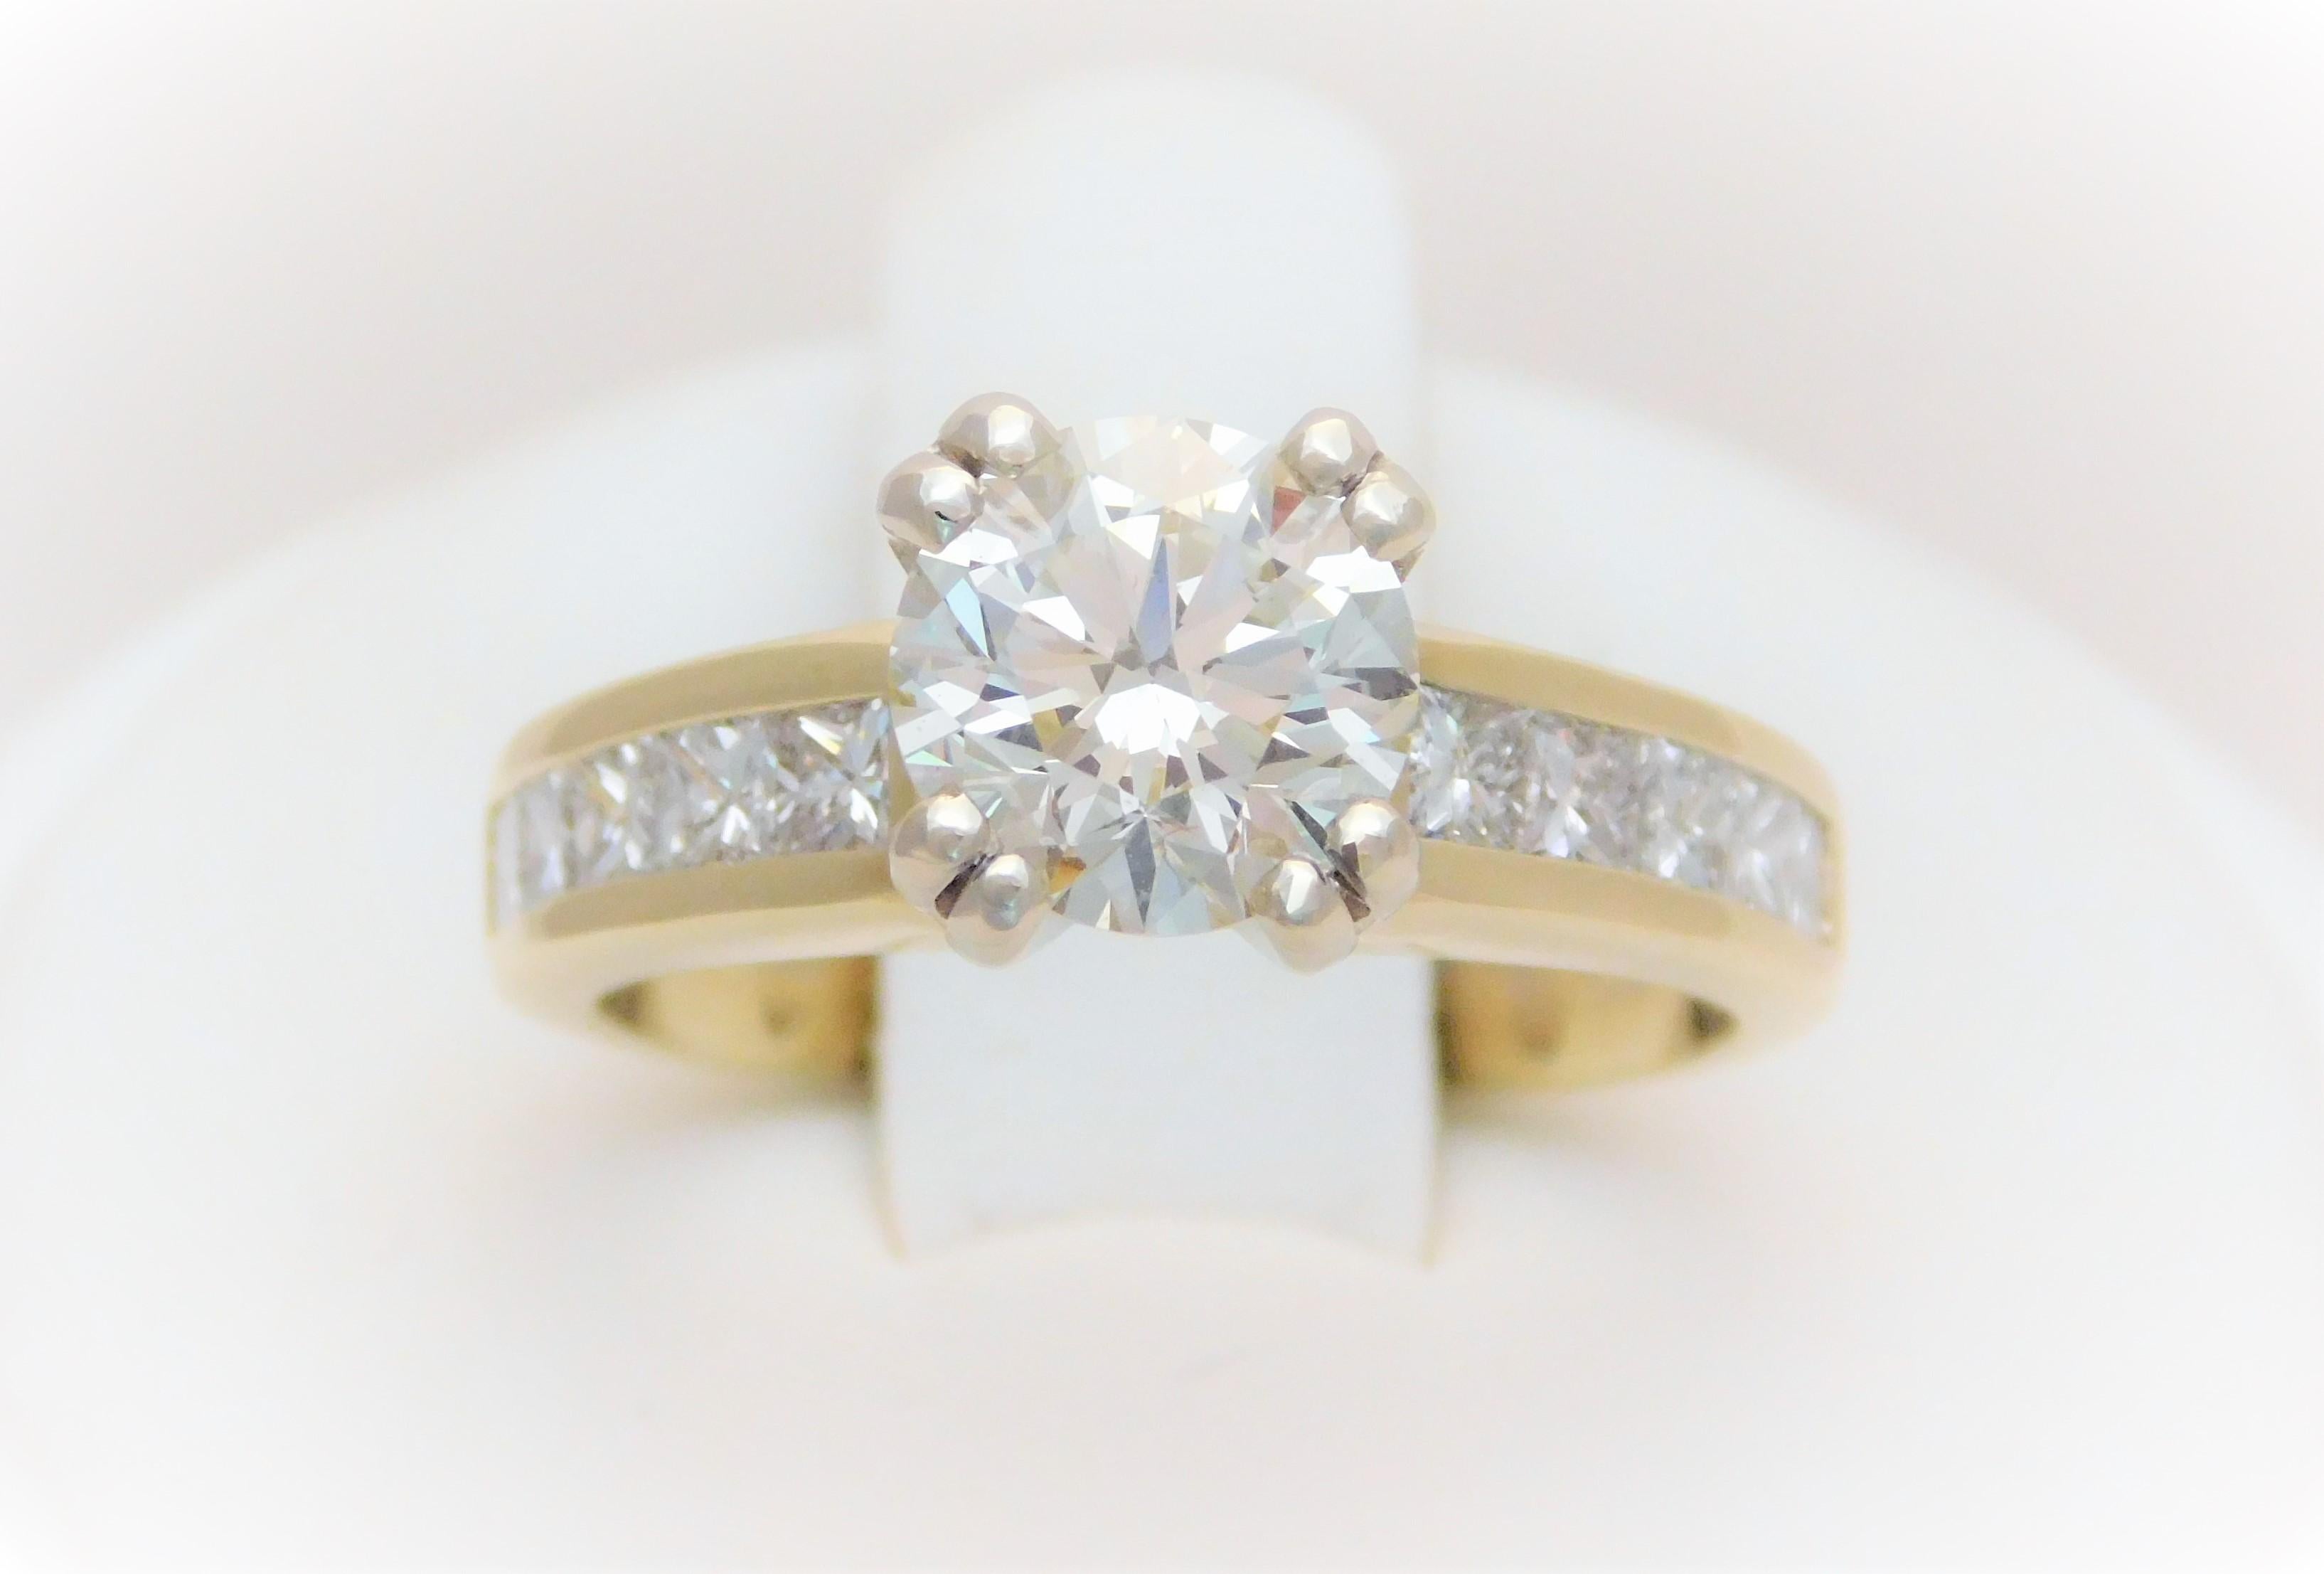 From an elegant New Orleans estate.  This stunning diamond engagement ring has been crafted in solid 14k gold.  It has been masterfully set, in a four double-prong setting, with an incredibly vibrant Natural round brilliant-cut 1.71ct diamond as its